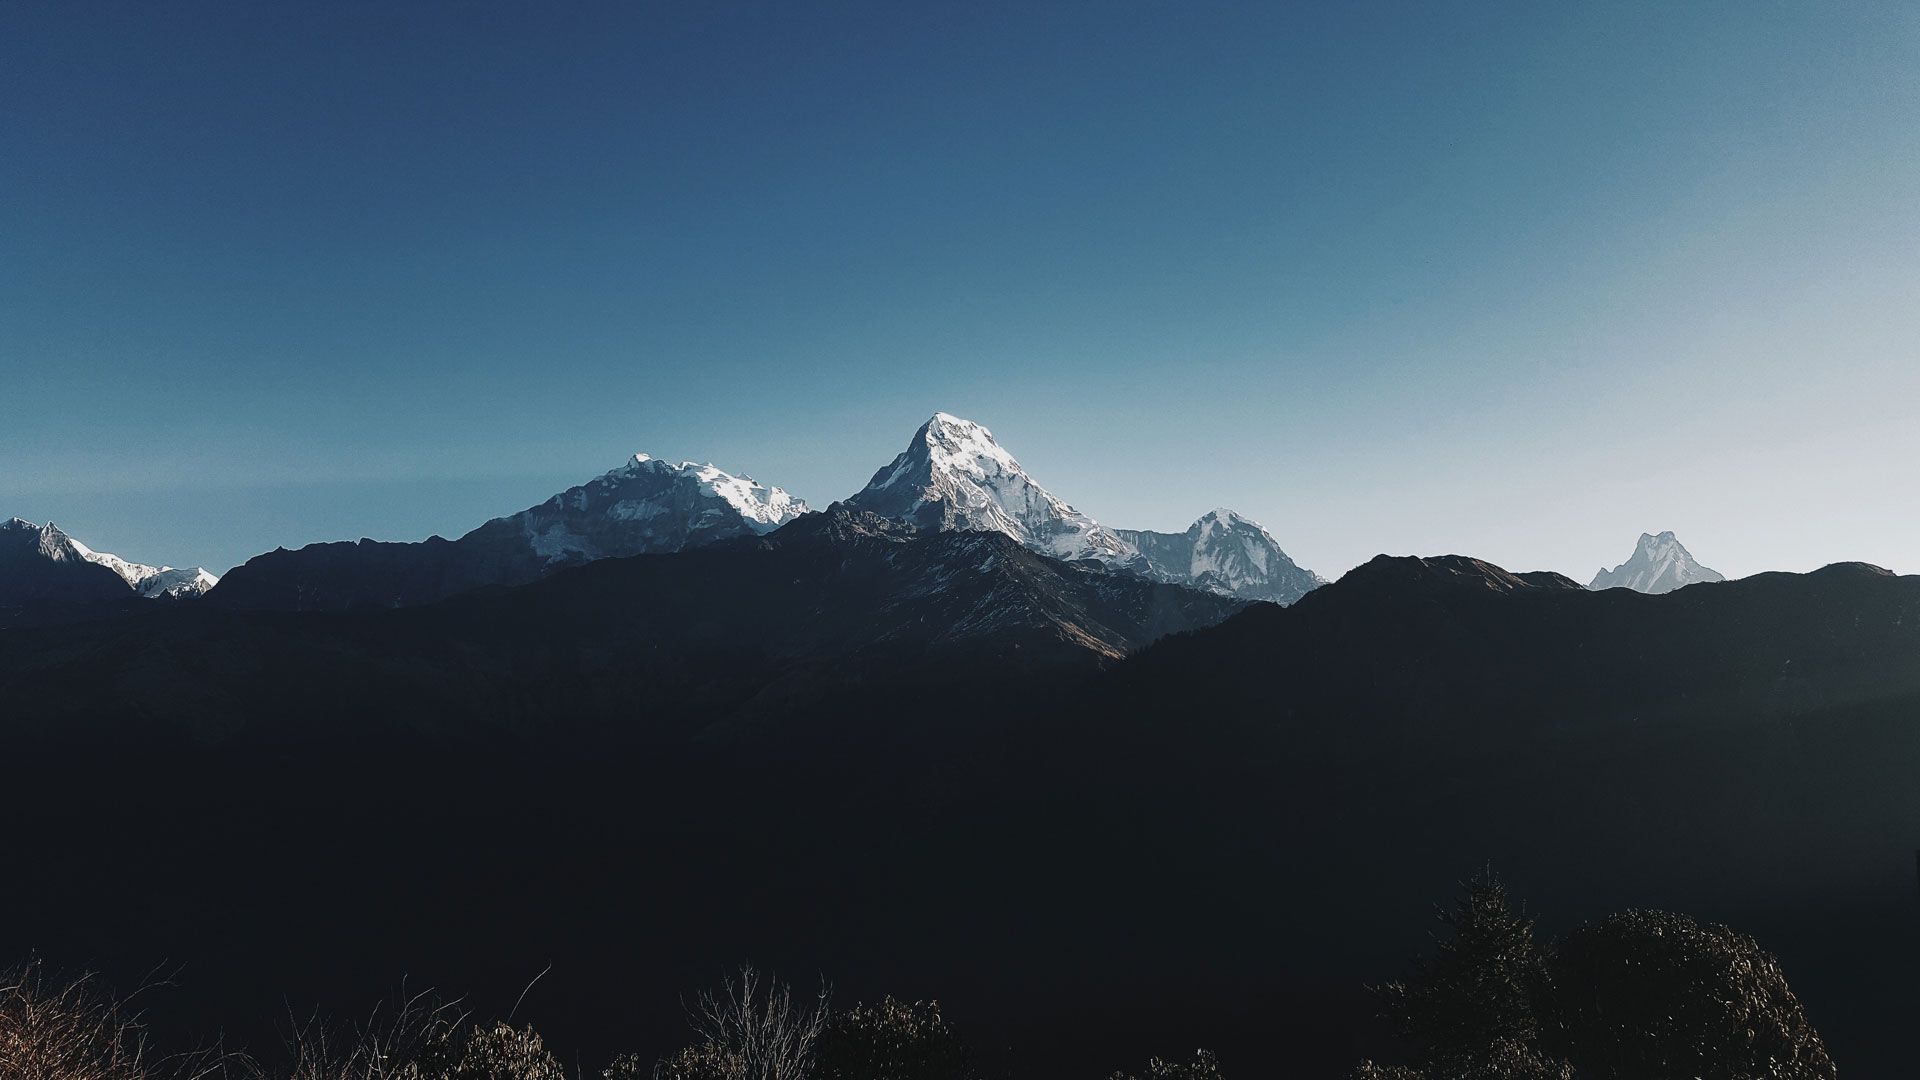 Annapurna South from Poon Hill